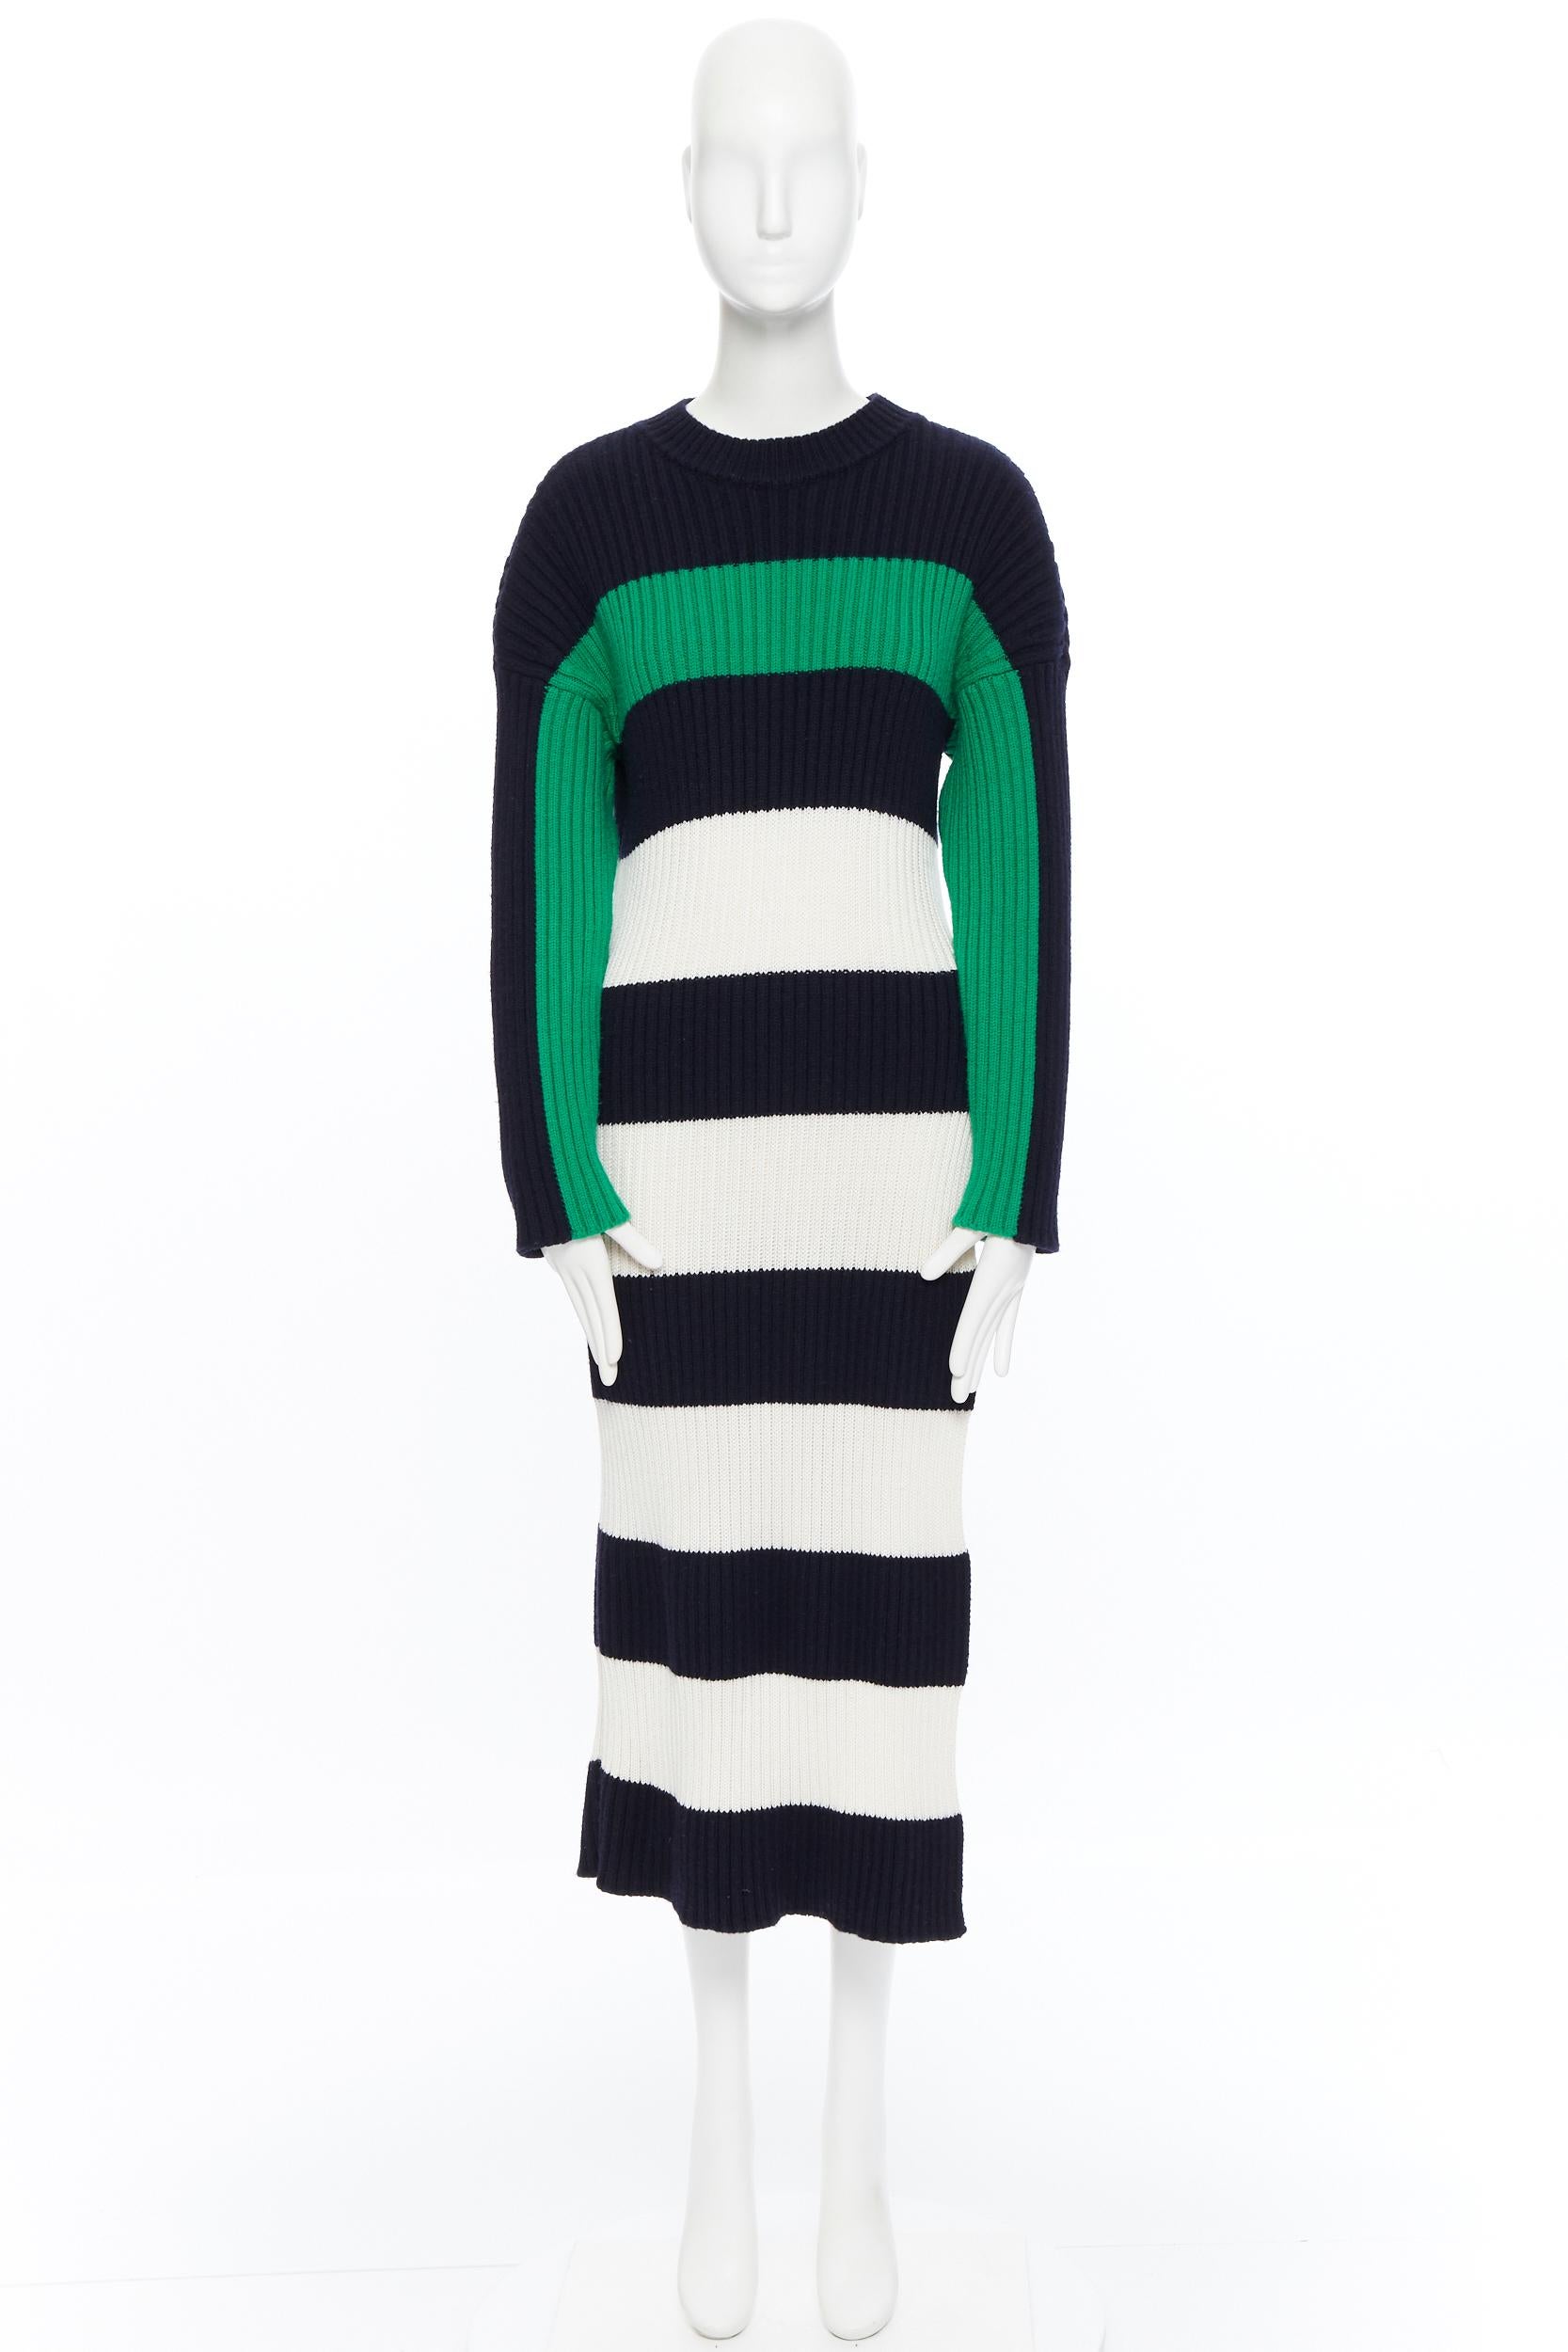 STELLA MCCARTNEY navy green white stripe ribbed virgin wool knit split sweater S
Brand: Stella McCartney
Designer: Stella McCartney
Model Name / Style: Sweater dress
Material: Wool
Color: Multicolour
Pattern: Striped
Extra Detail: Long sleeve. Round